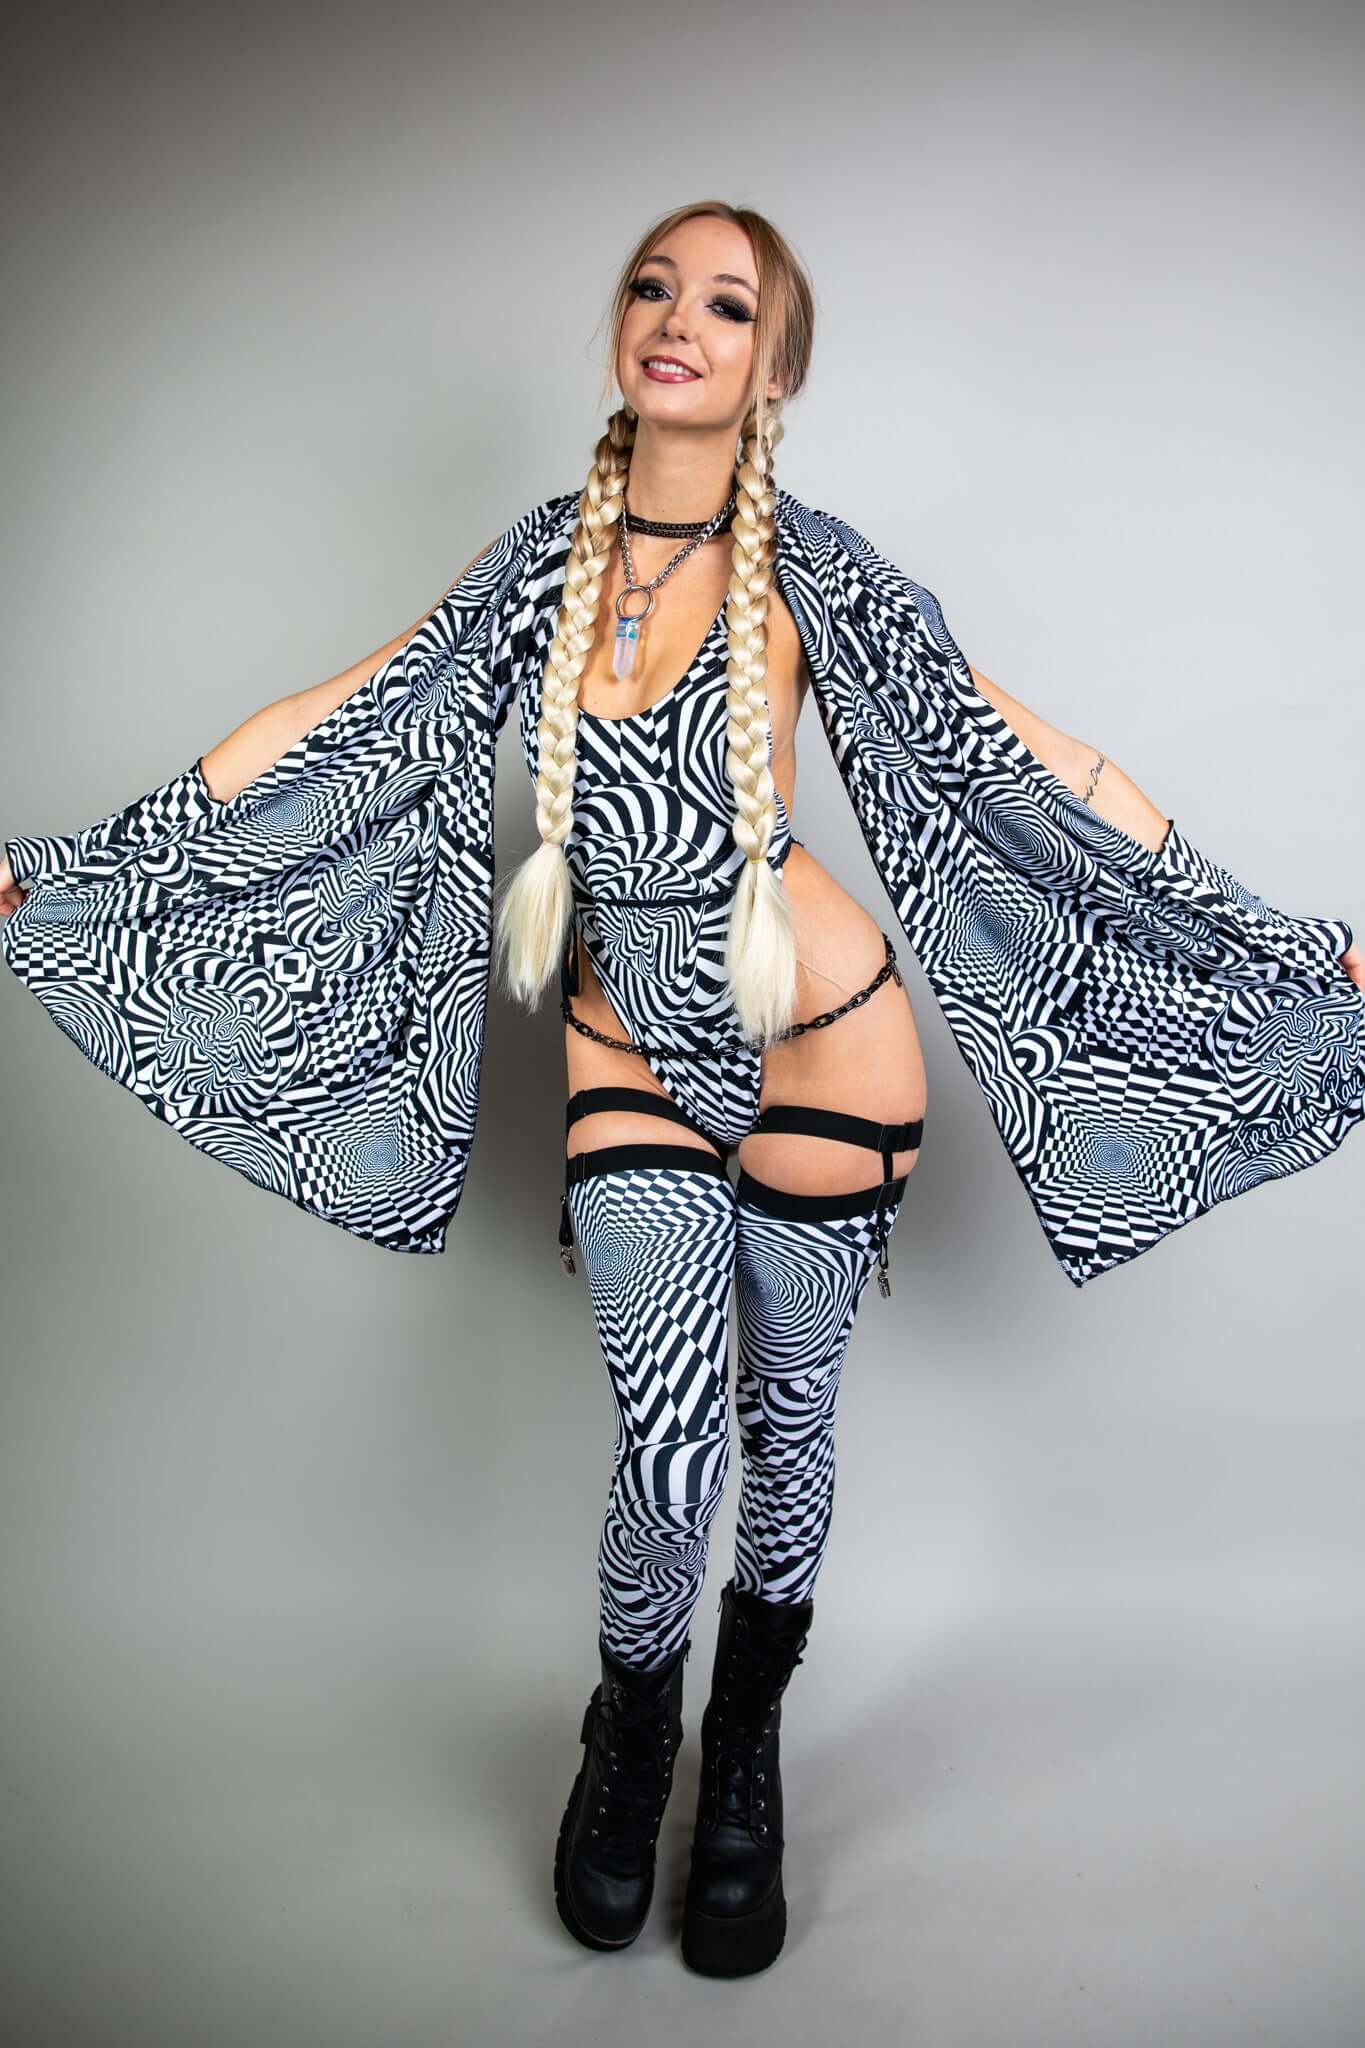 A woman wearing a black and white geometric printed bodysuit with a matching pashmina draped over her shoulders.